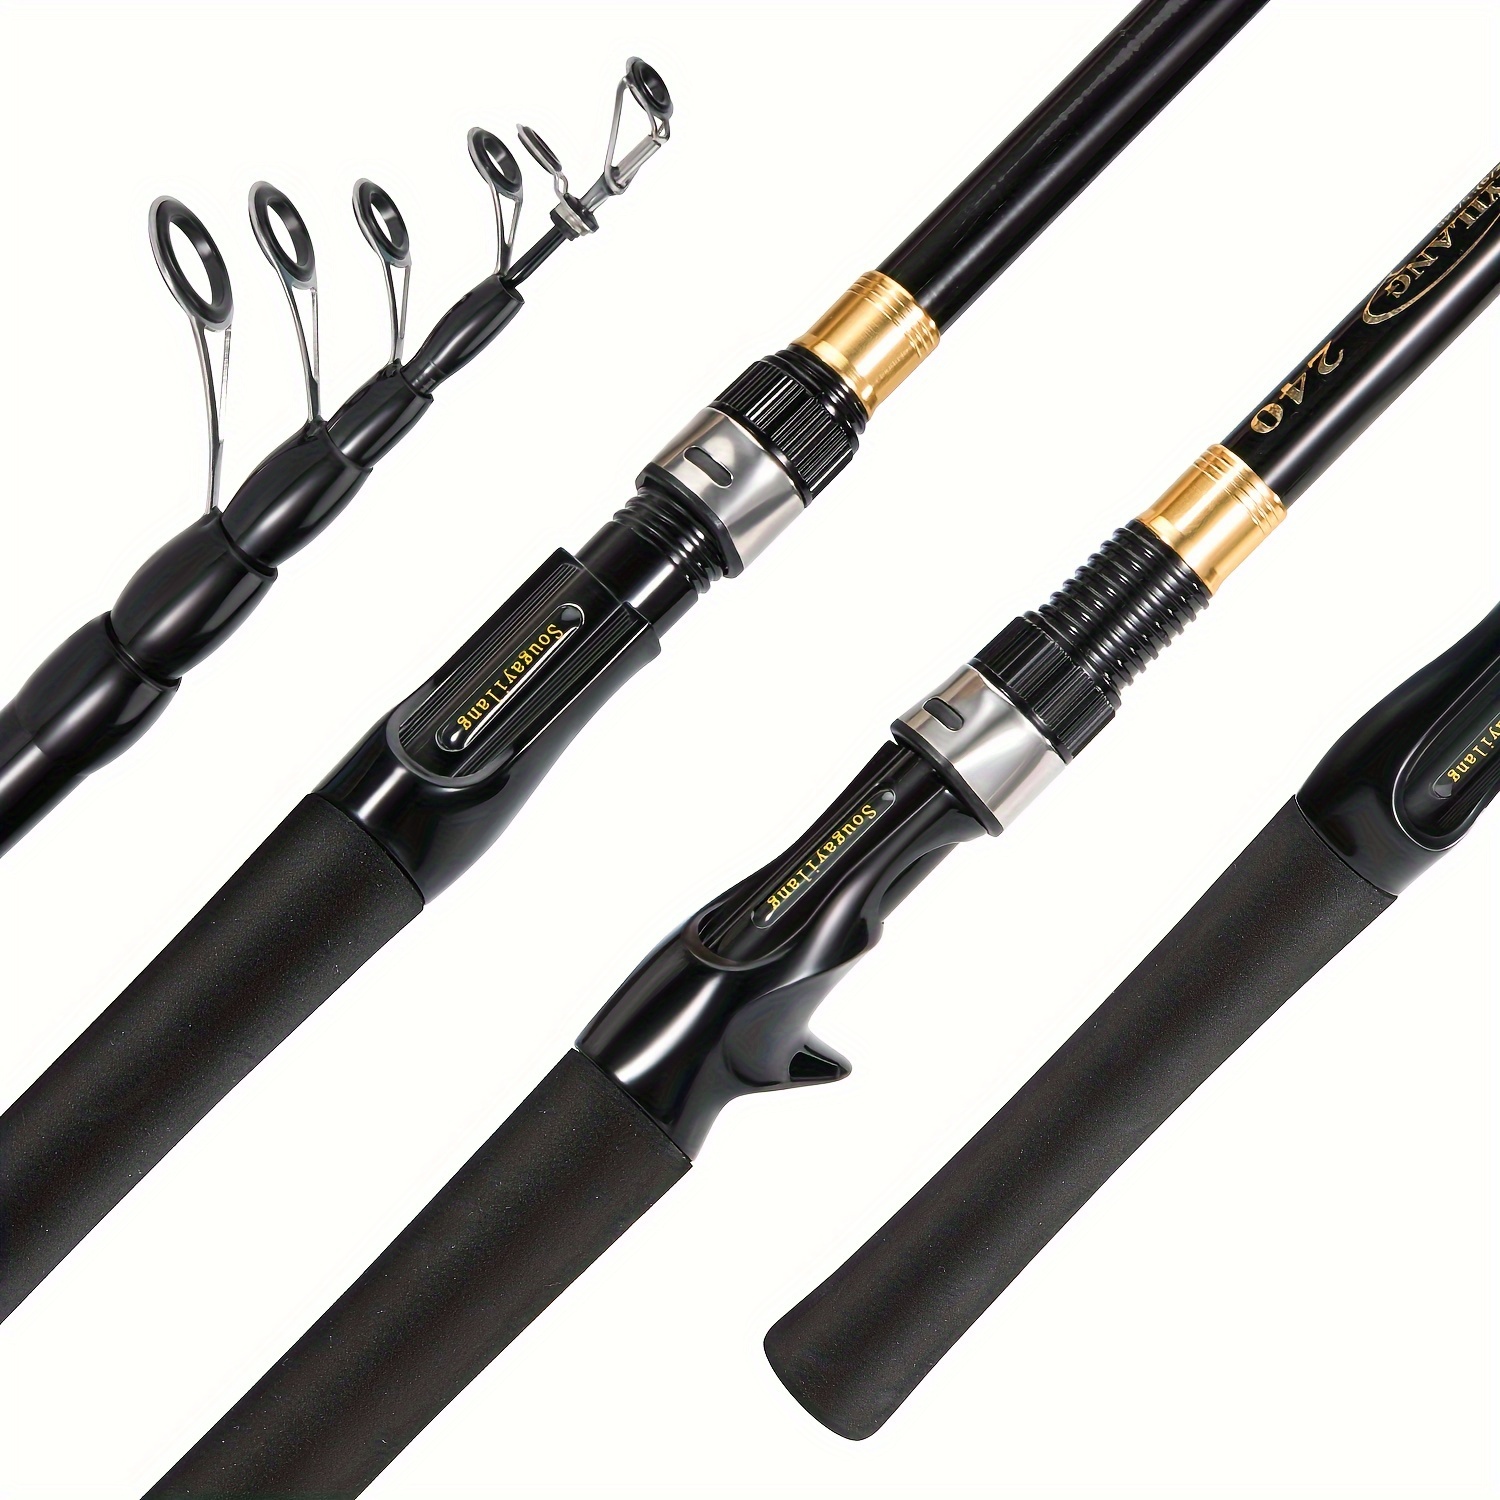 Sougayilang Fishing Rod 4 Section Carbon fiber Fishing Rod Spinning/Casting  Travel Rod Fishing Tackle - buy Sougayilang Fishing Rod 4 Section Carbon  fiber Fishing Rod Spinning/Casting Travel Rod Fishing Tackle: prices,  reviews